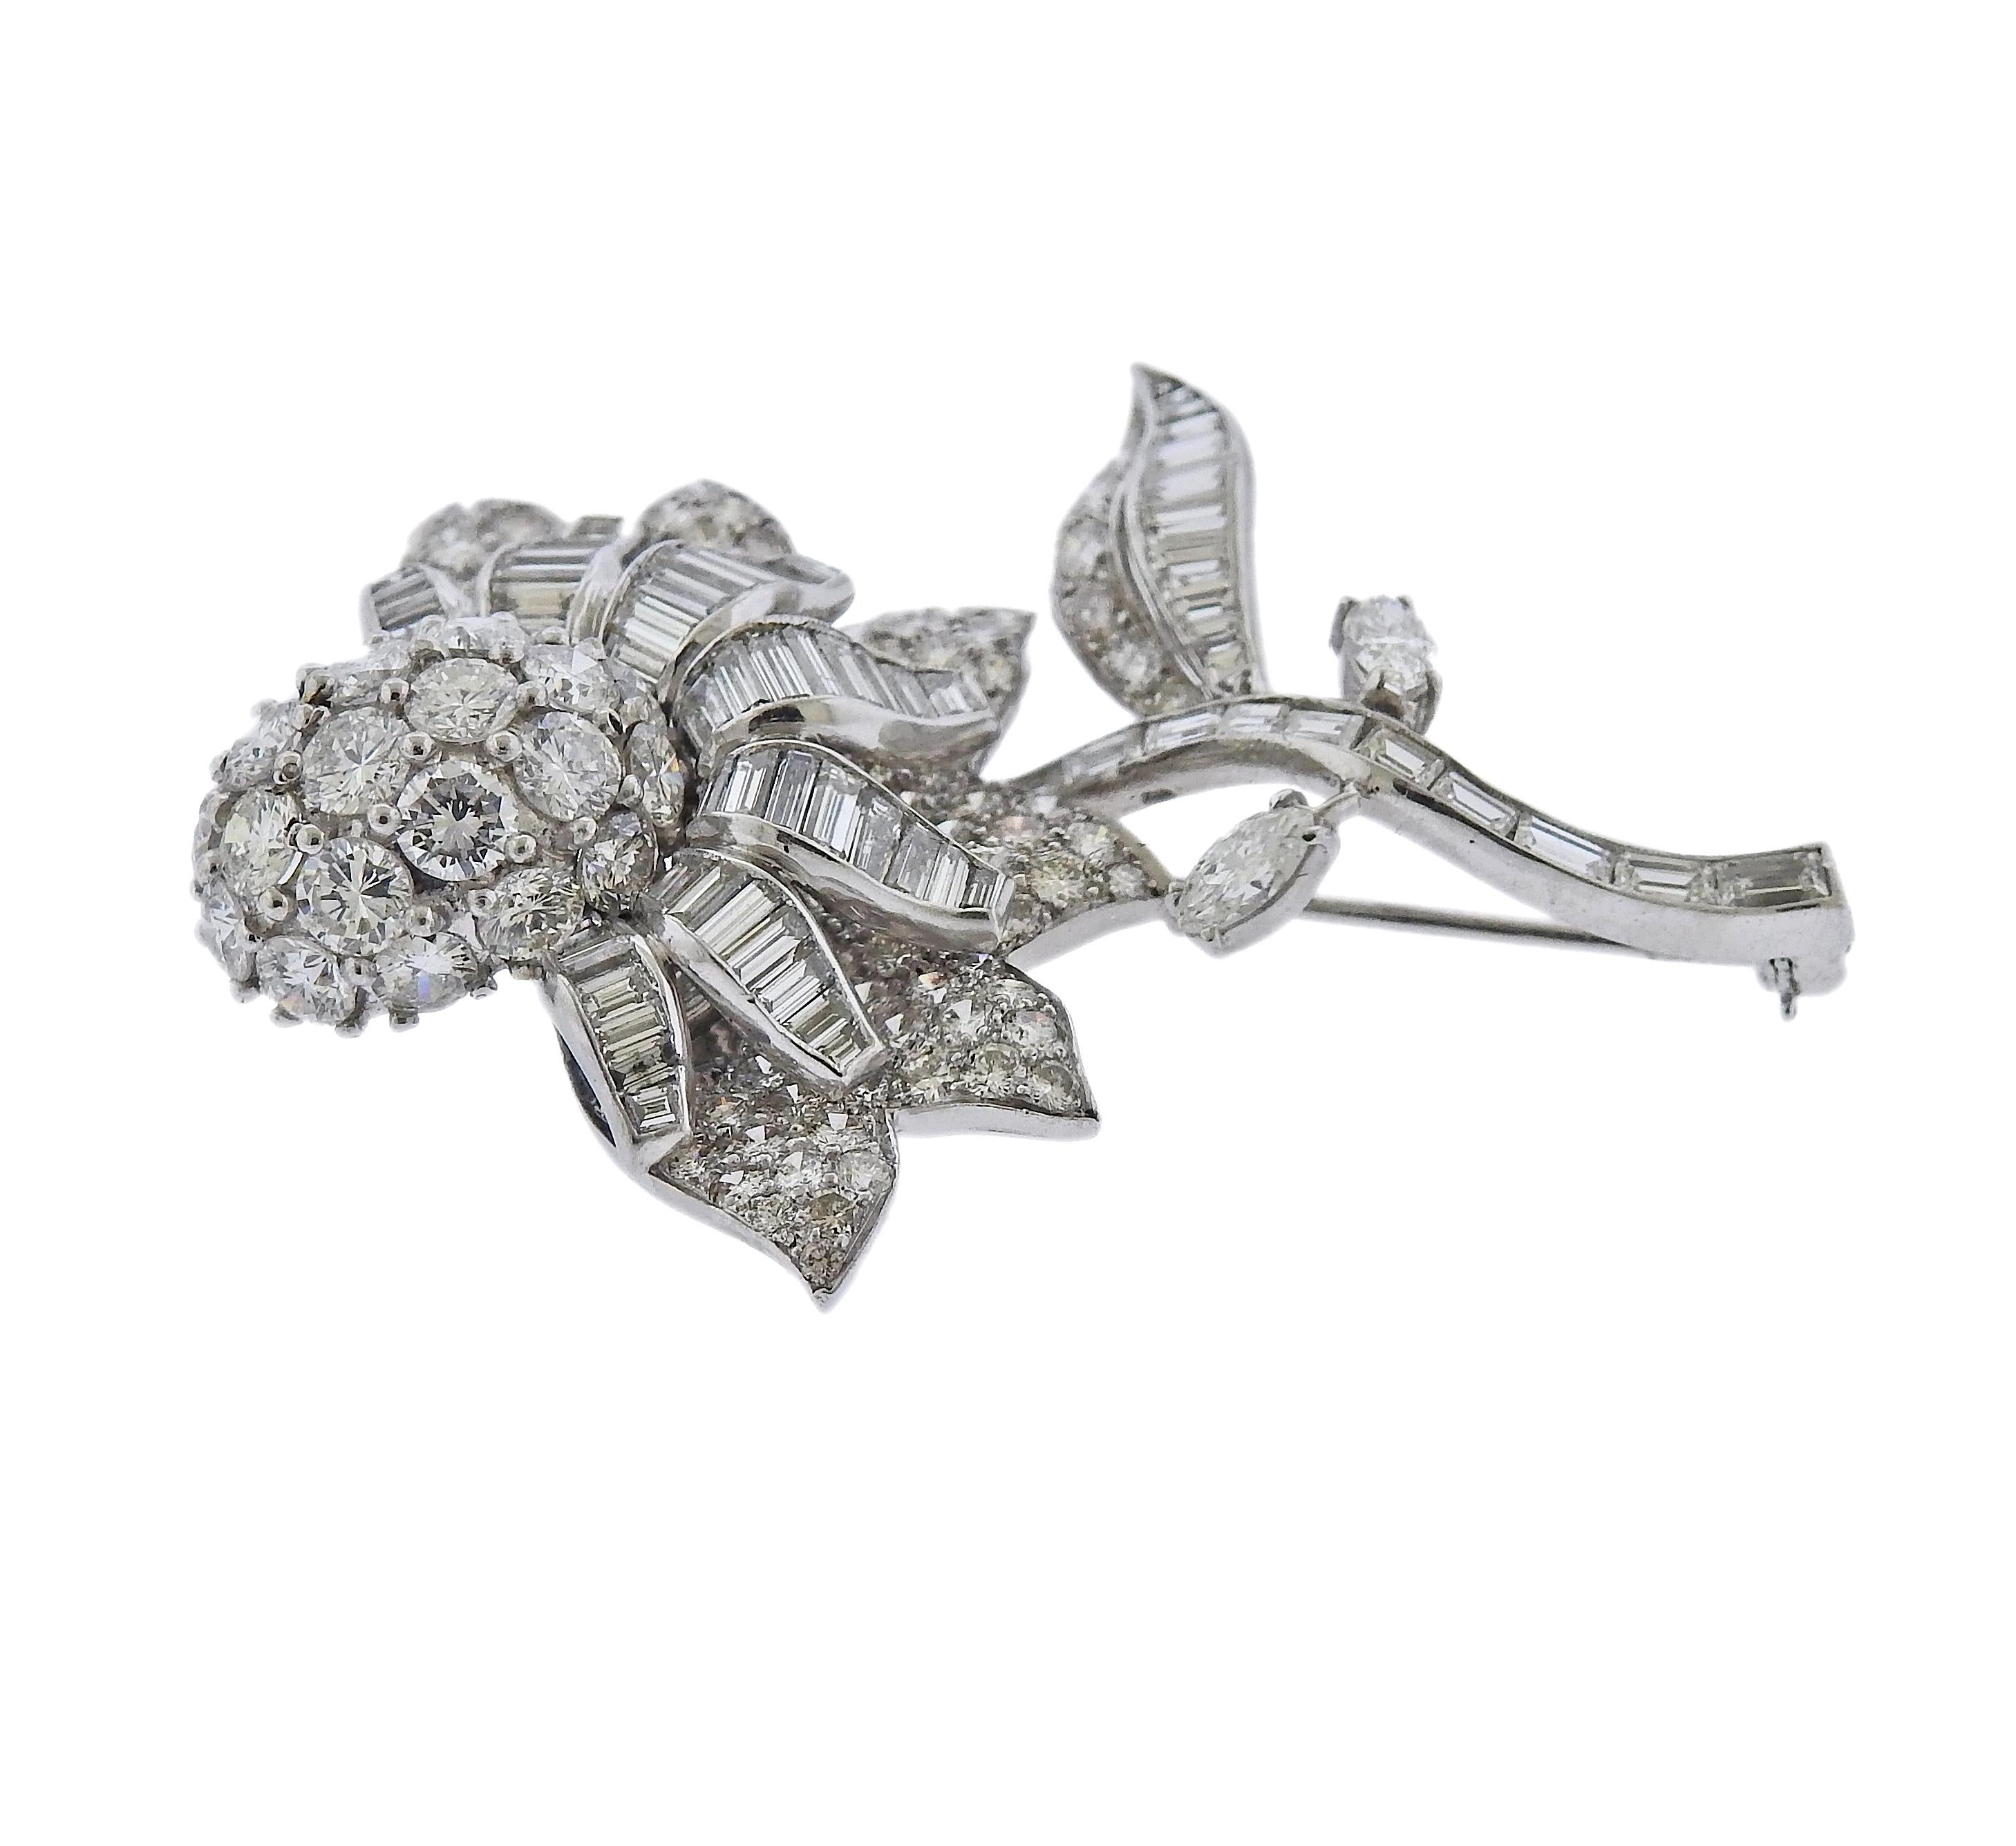 Impressive and timeless platinum flower brooch by Van Cleef & Arpels, set in platinum, with approx. 16 carats in FG/VVS diamonds. Brooch is 2 1/8